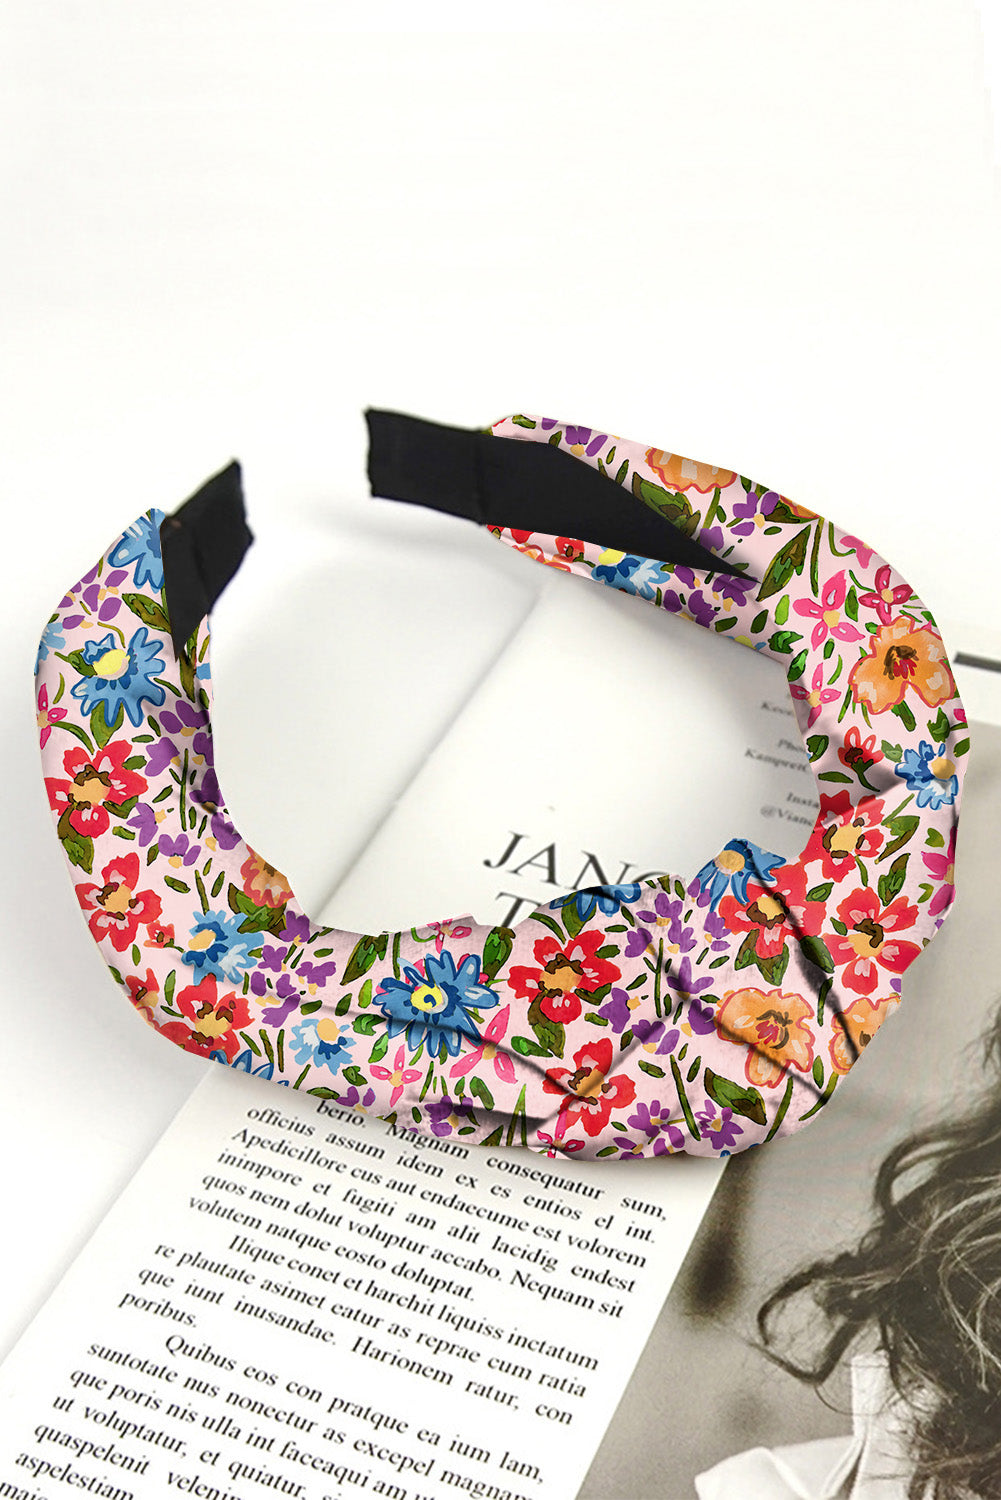 Multicolor Sweet Floral Bow Knotted Headband 14*18cm